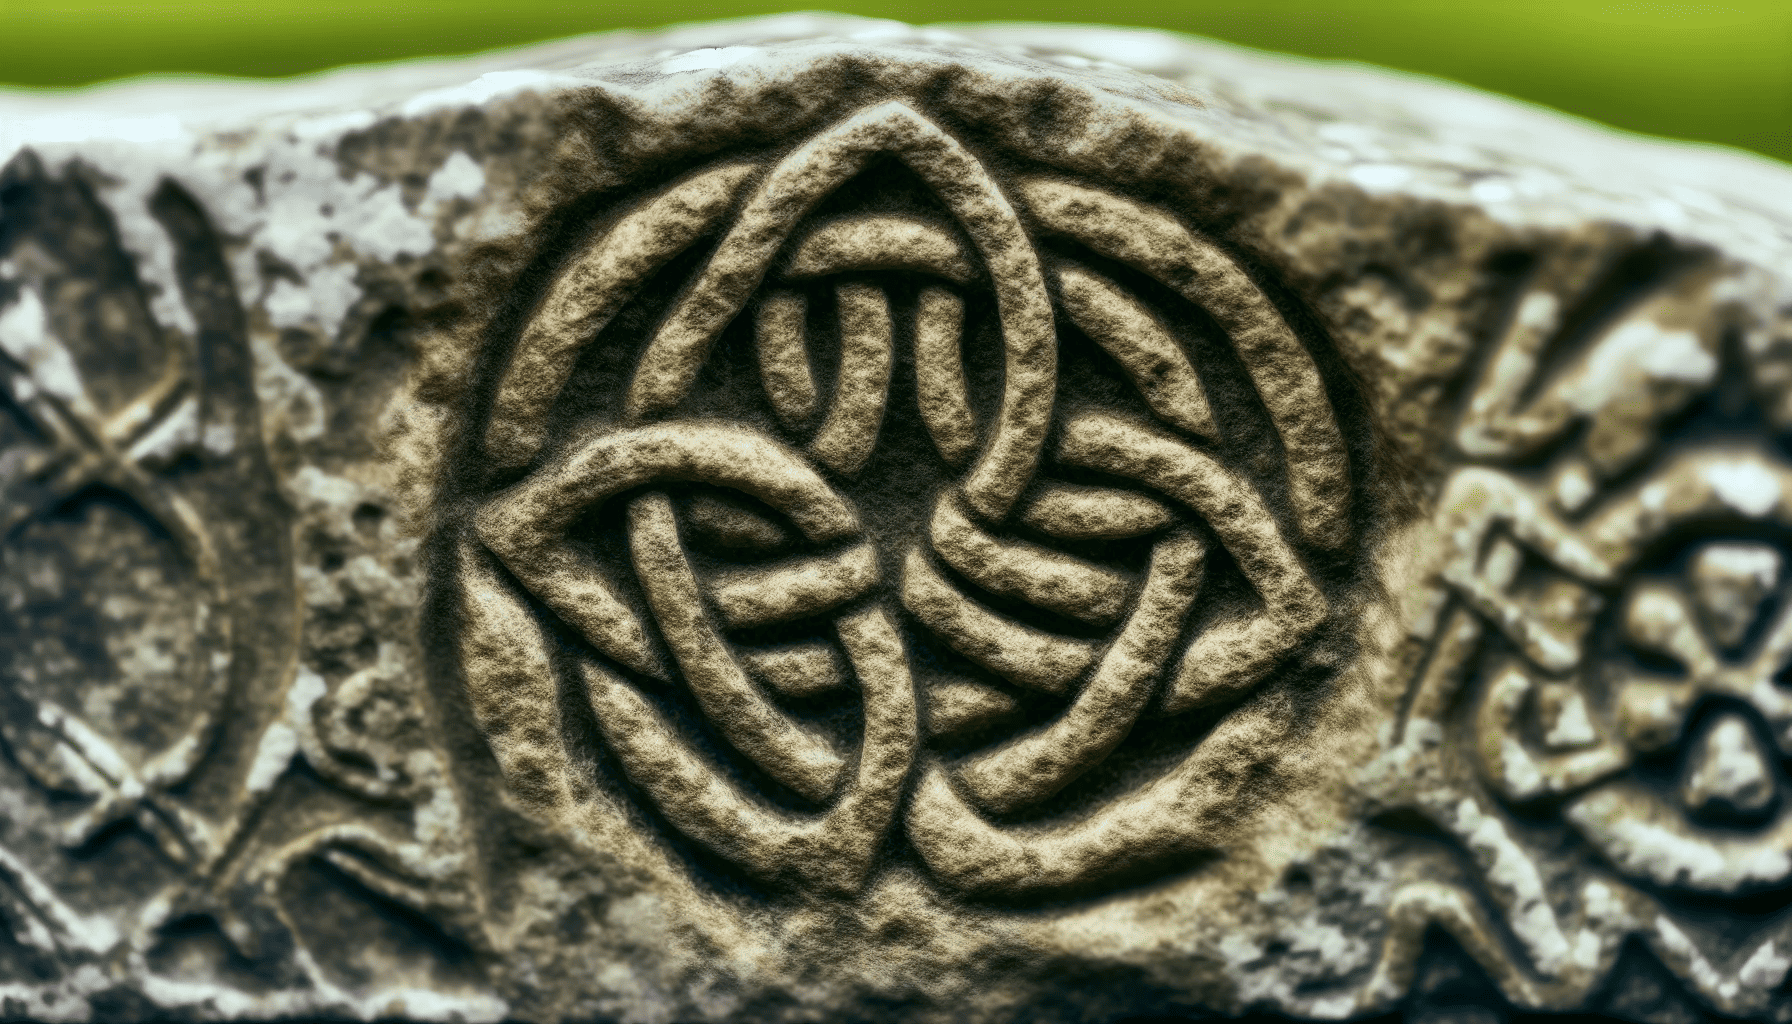 Ancient stone carving with intricate trinity knot design